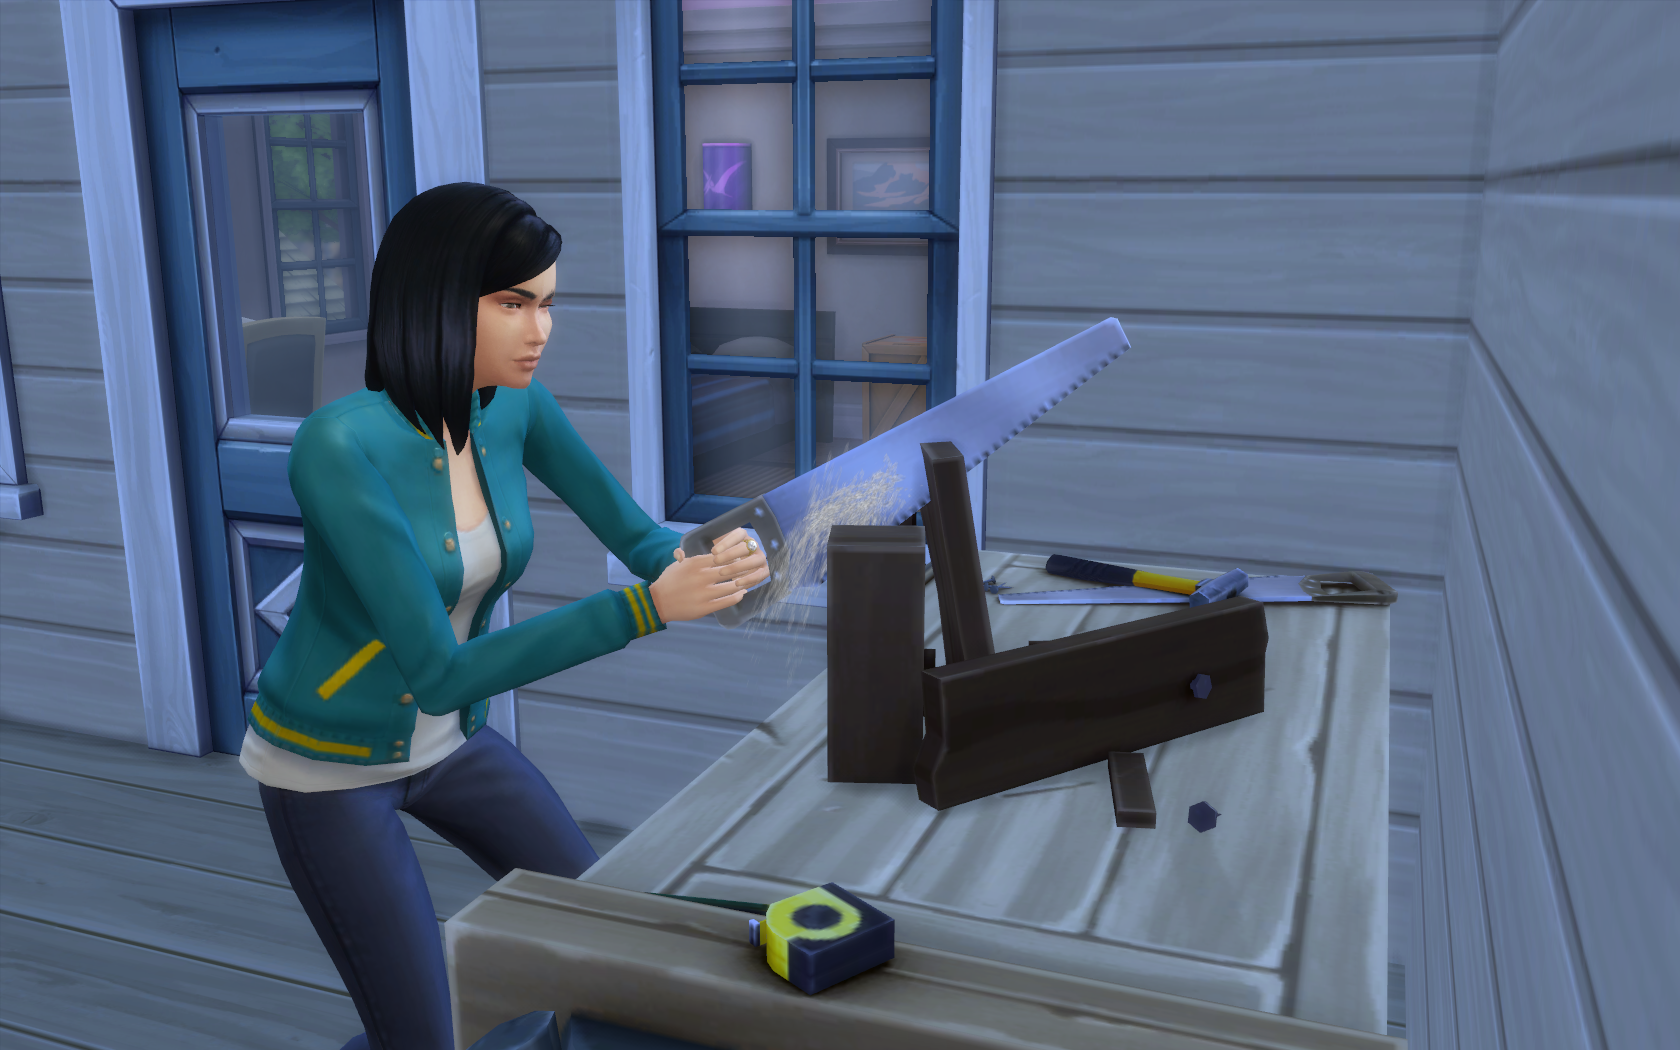 The Sims 4 Handiness Skill cheat: What is it & how to use